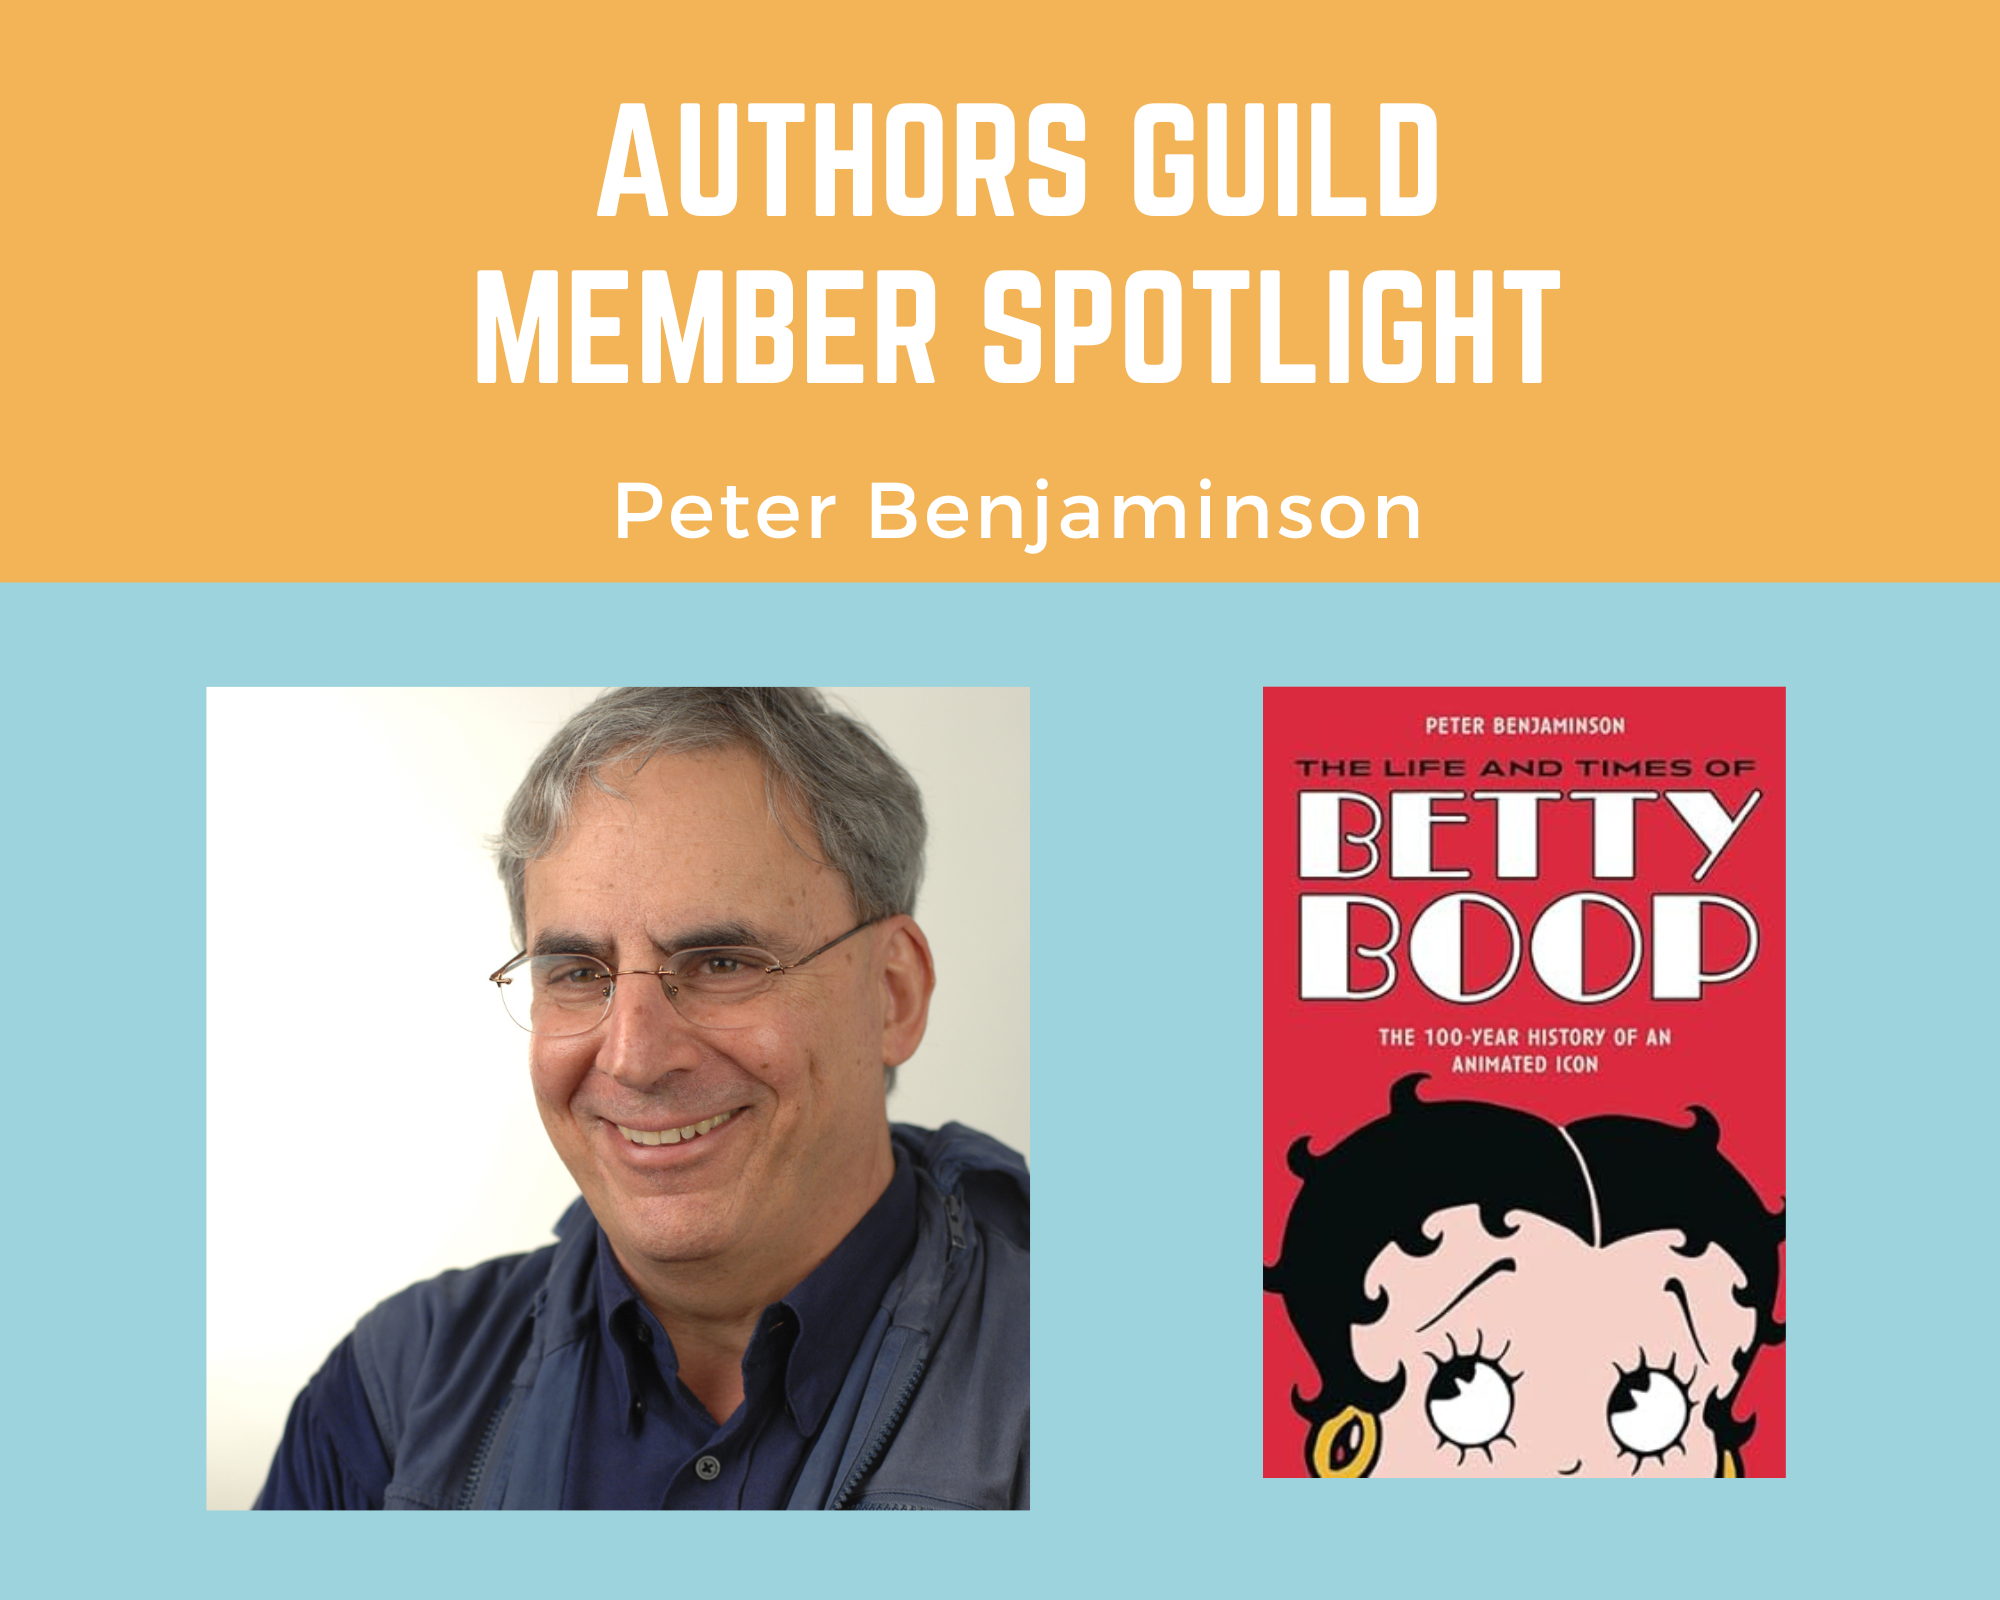 author Peter Benjaminson and an image of his book The Life and Times of Betty Boop